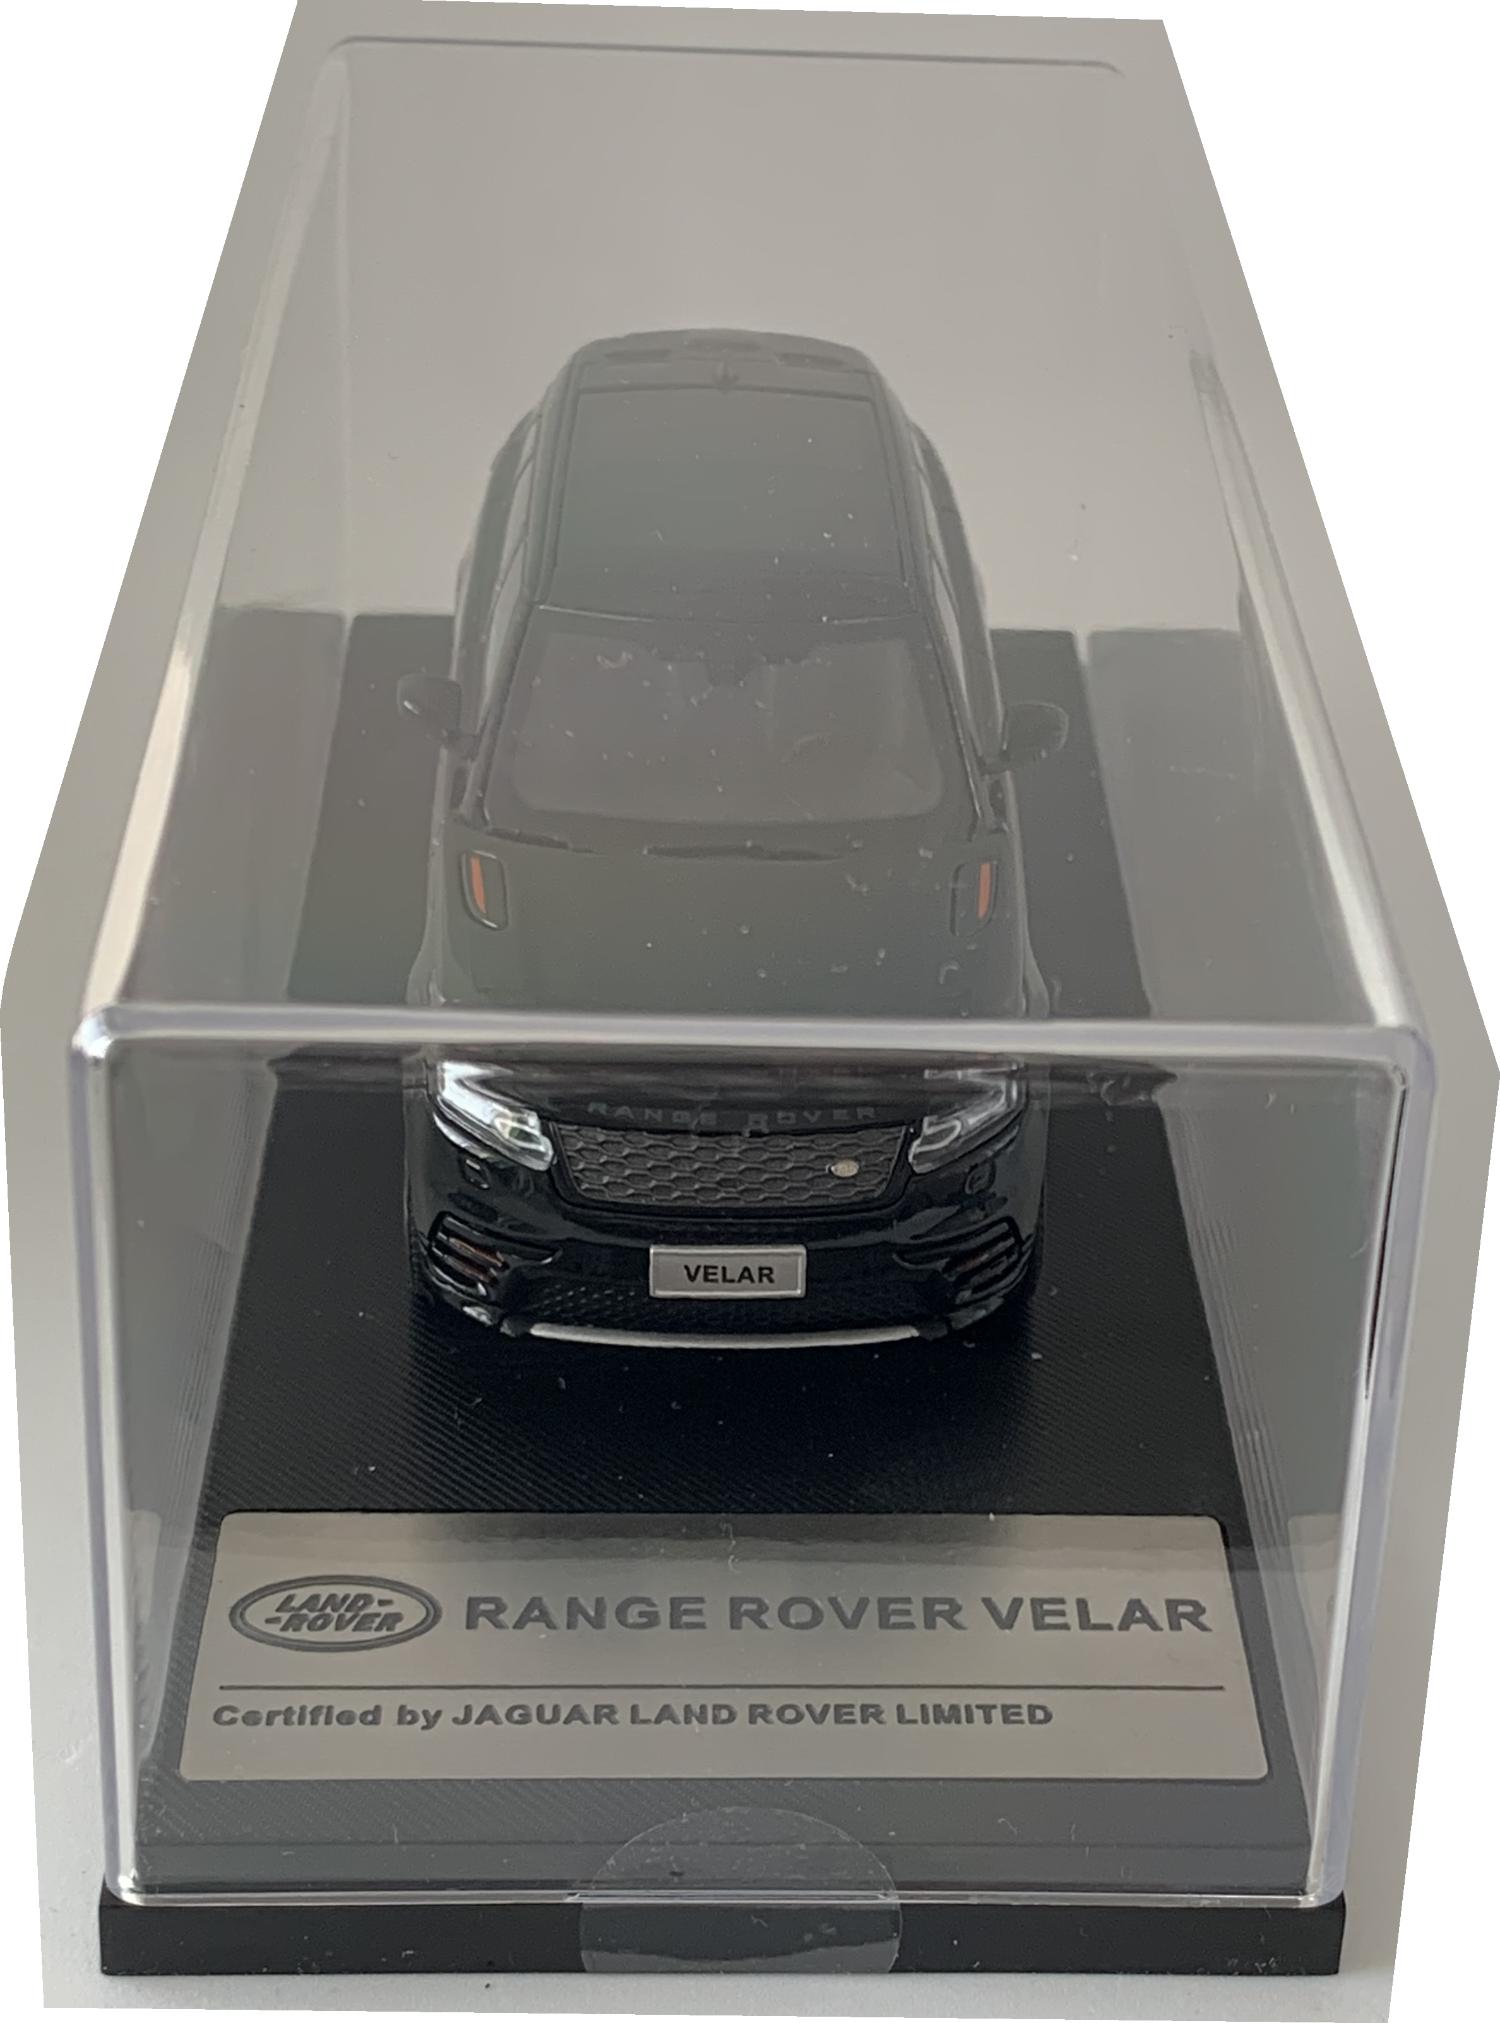 A very high quality accurate representation of the Land Rover Range Rover Evoque First Edition decorated in black with black panoramic roof, rear top spoiler with dark grey and silver wheels.